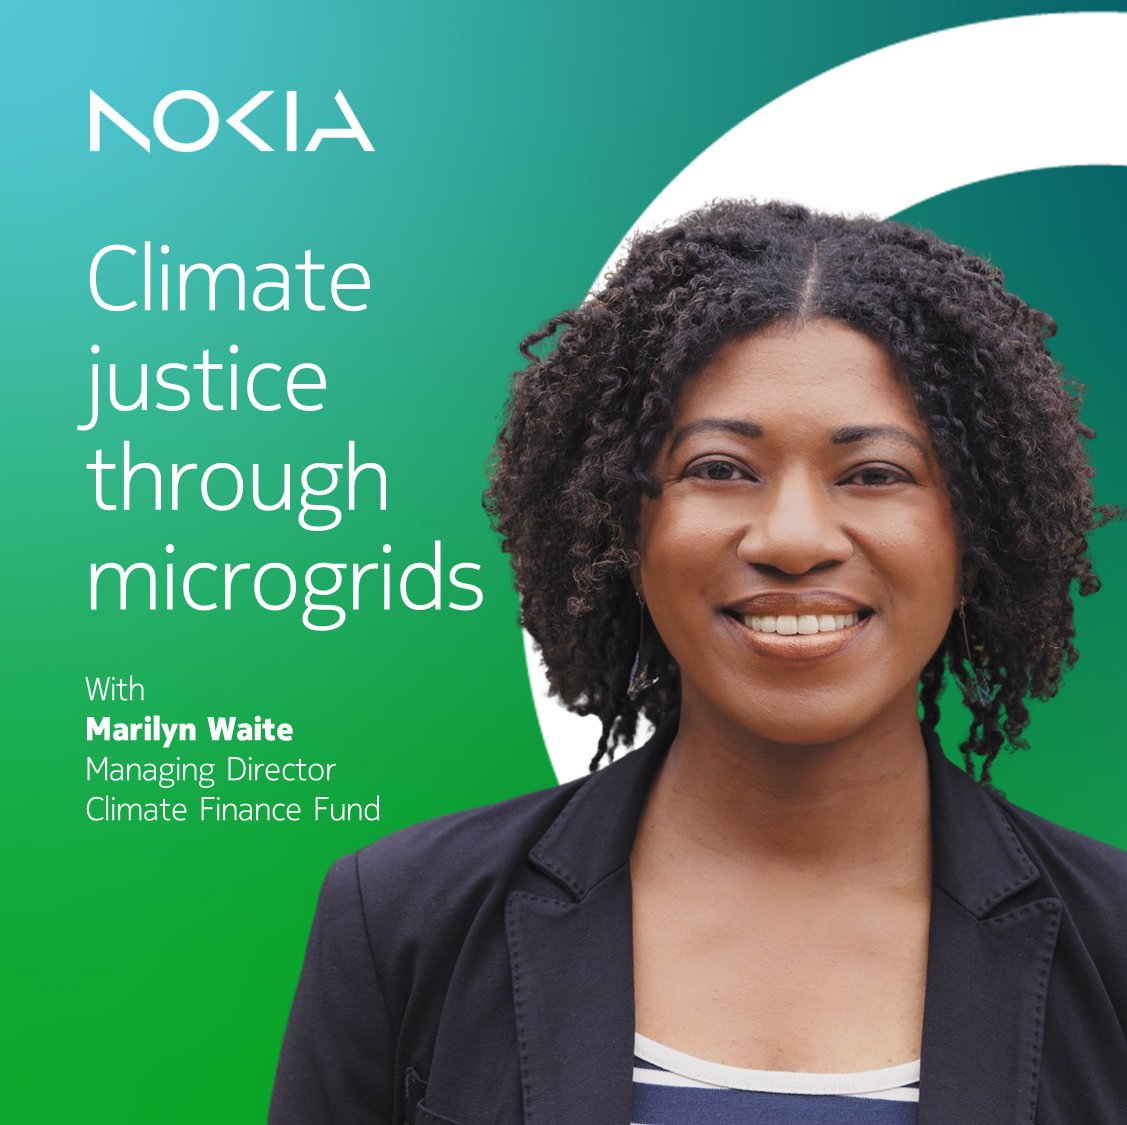 How do communities burdened by the cost of energy lift themselves out of poverty while reducing their carbon footprint? For The Climate Finance Fund’s Marilyn Waite, #microgridtechnology is a solution. #climatechange

Listen to the full #podcast nokia.ly/40LCvOm